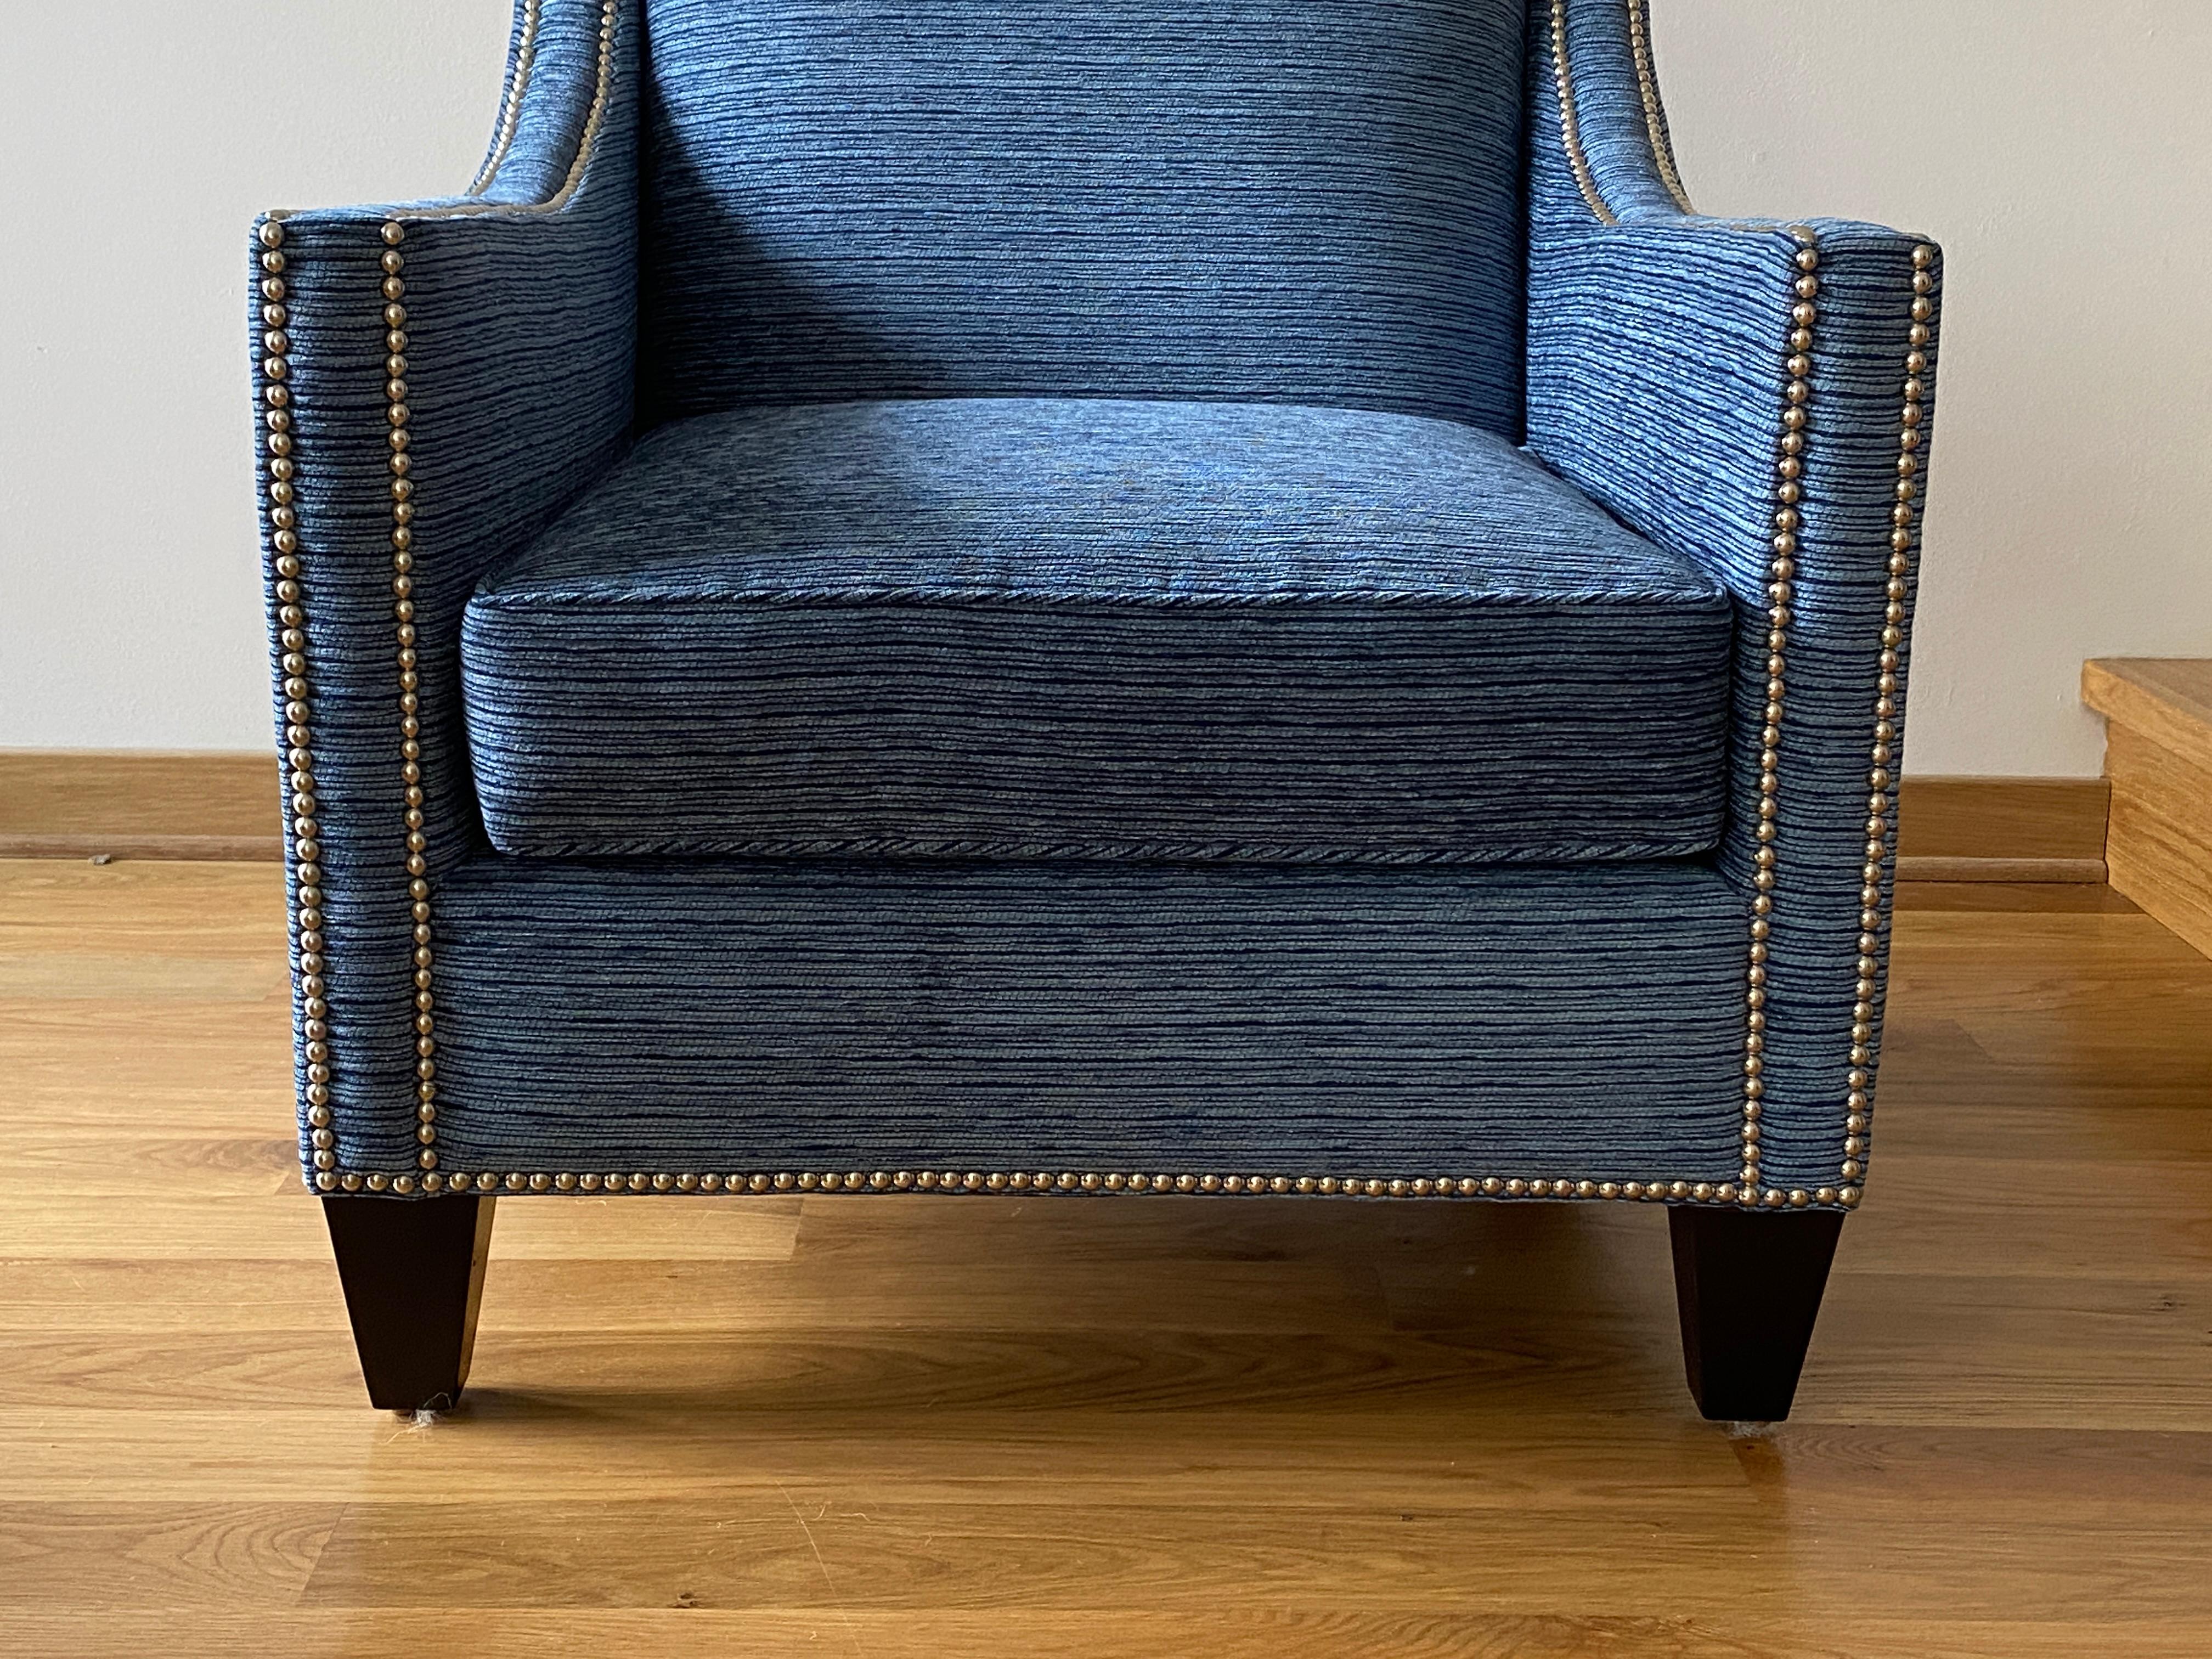 Contemporary Modern Club Chairs in Blue Performance Fabric with Nickel Nailhead Trim, Pair